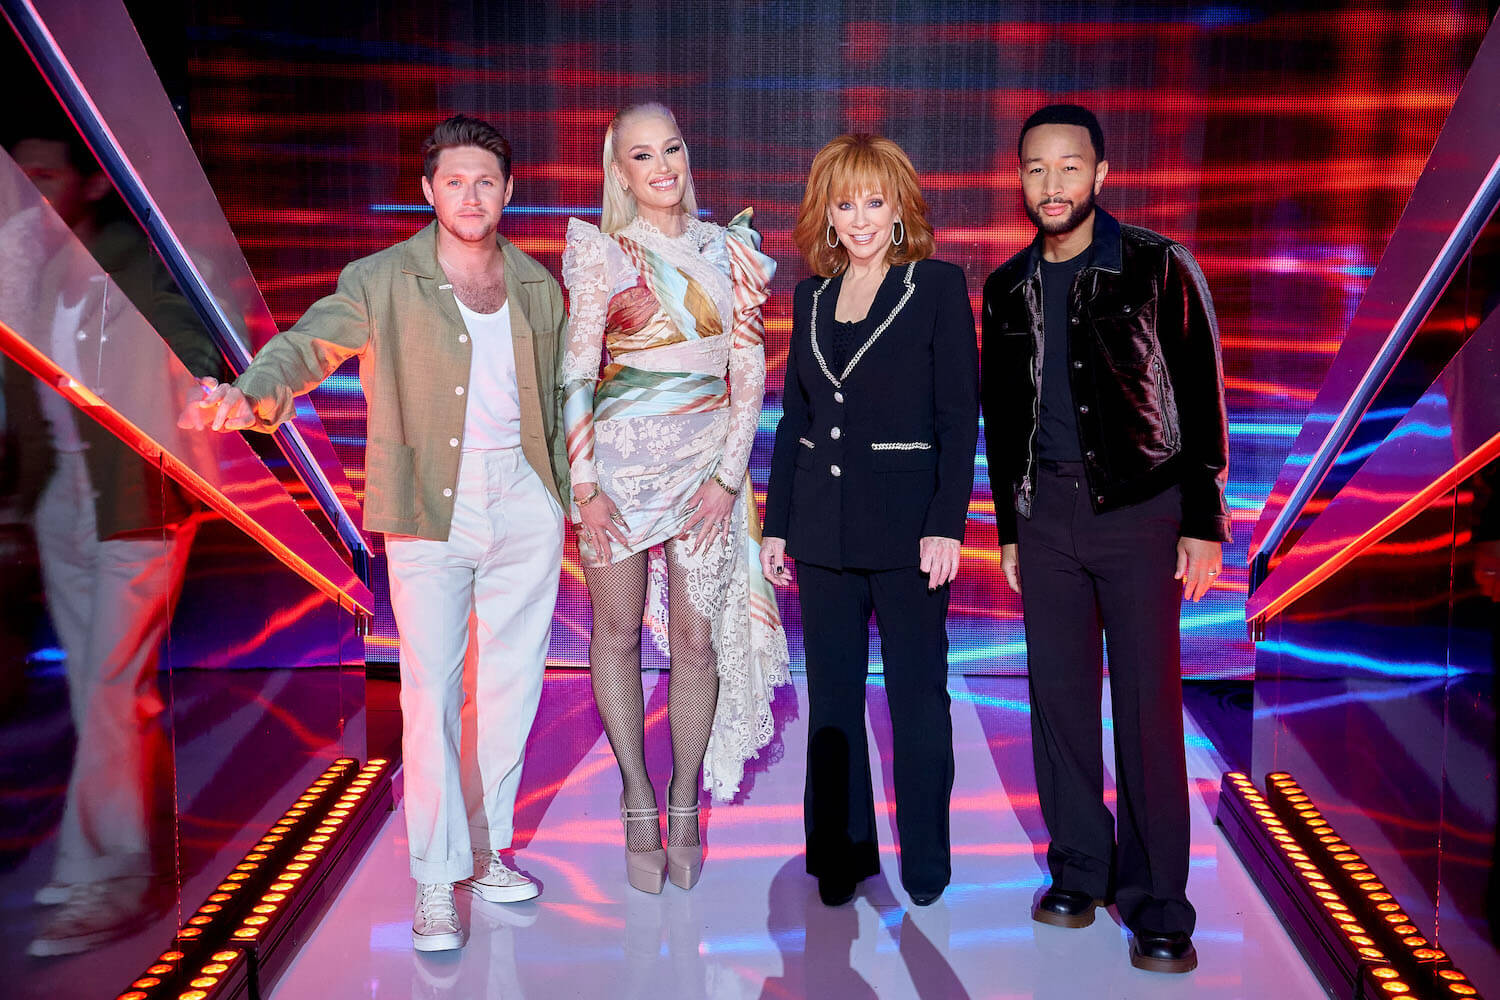 'The Voice' Season 24 coaches Niall Horan, Gwen Stefani, Reba McEntire, and John Legend standing next to each other